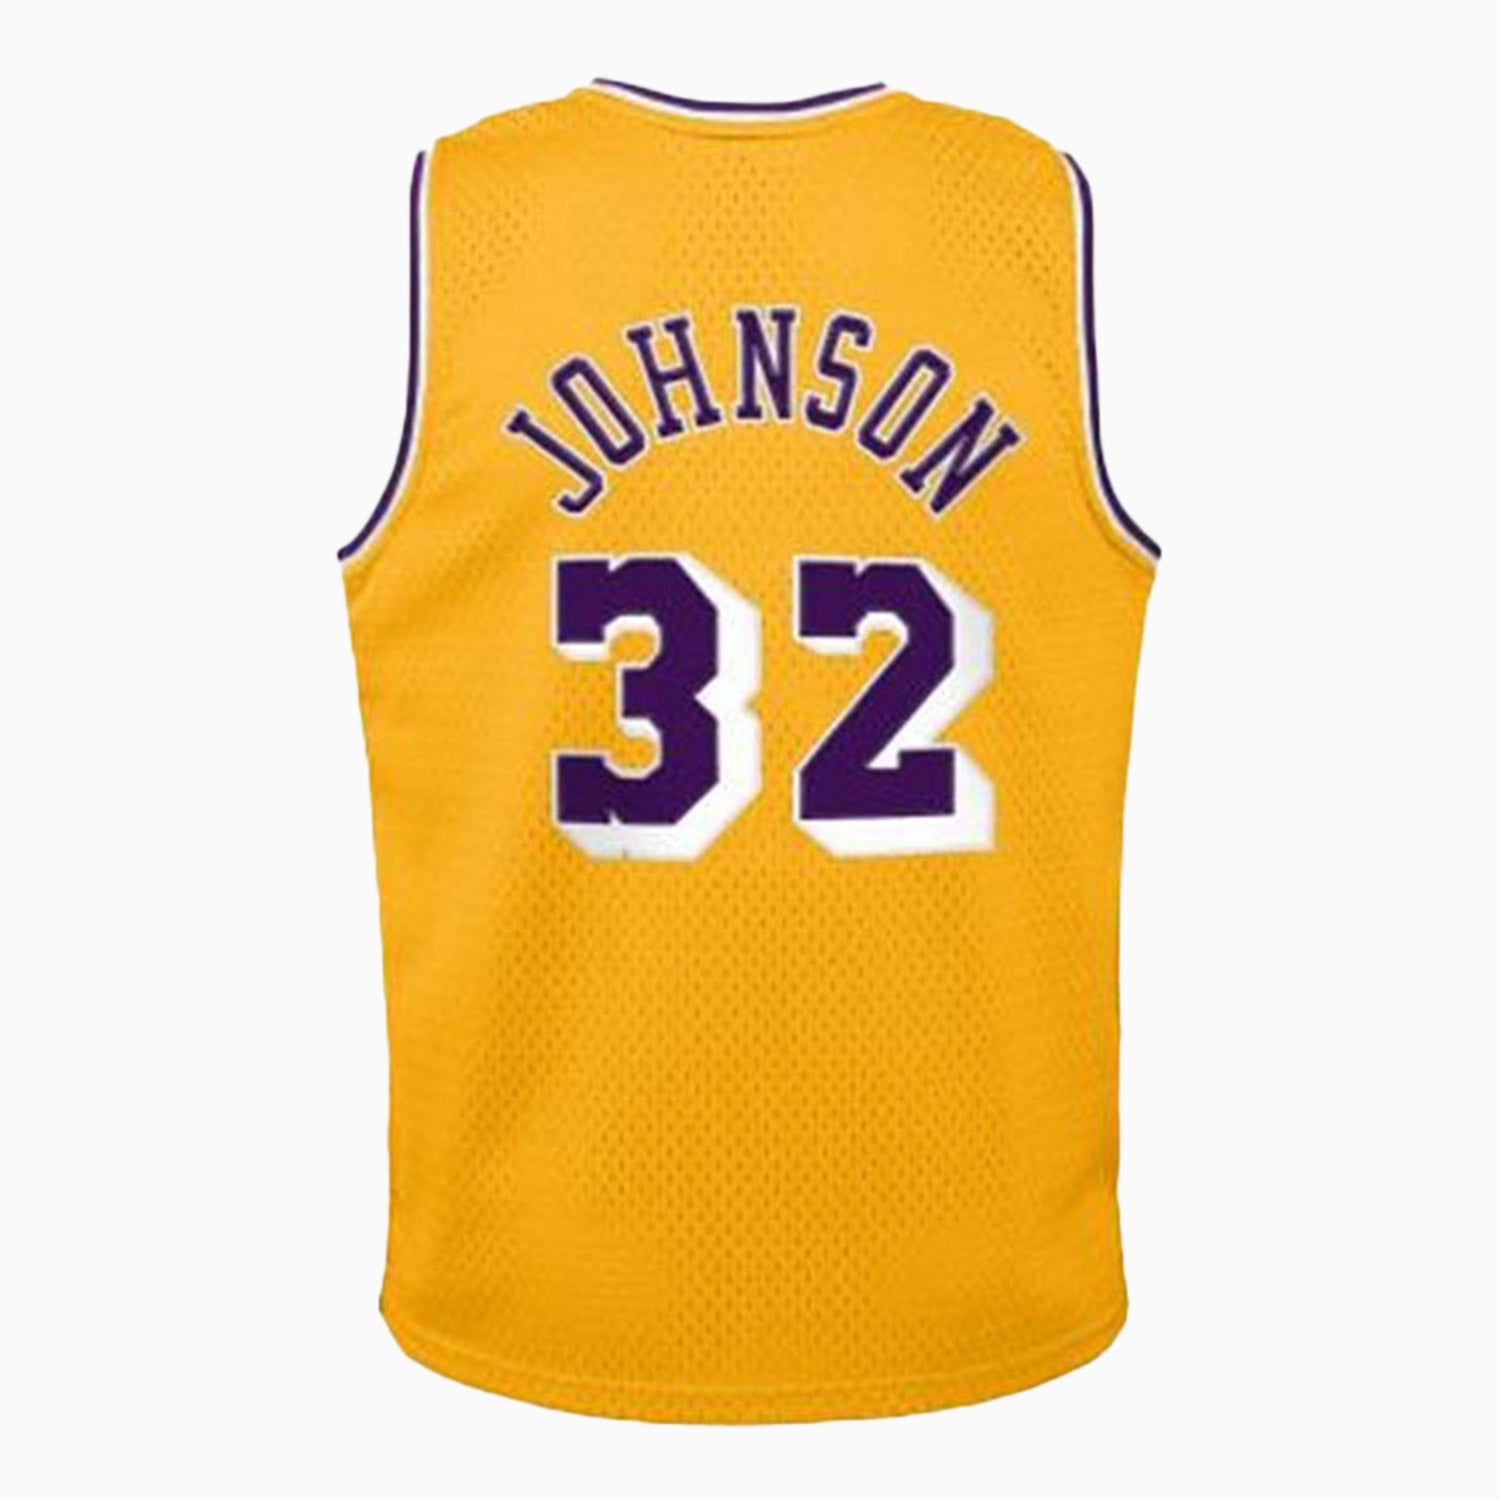 mitchell-and-ness-swingman-magic-johnson-los-angeles-lakers-nba-1984-85-jersey-toddlers-9n2t1bhm0-lakmj-y84